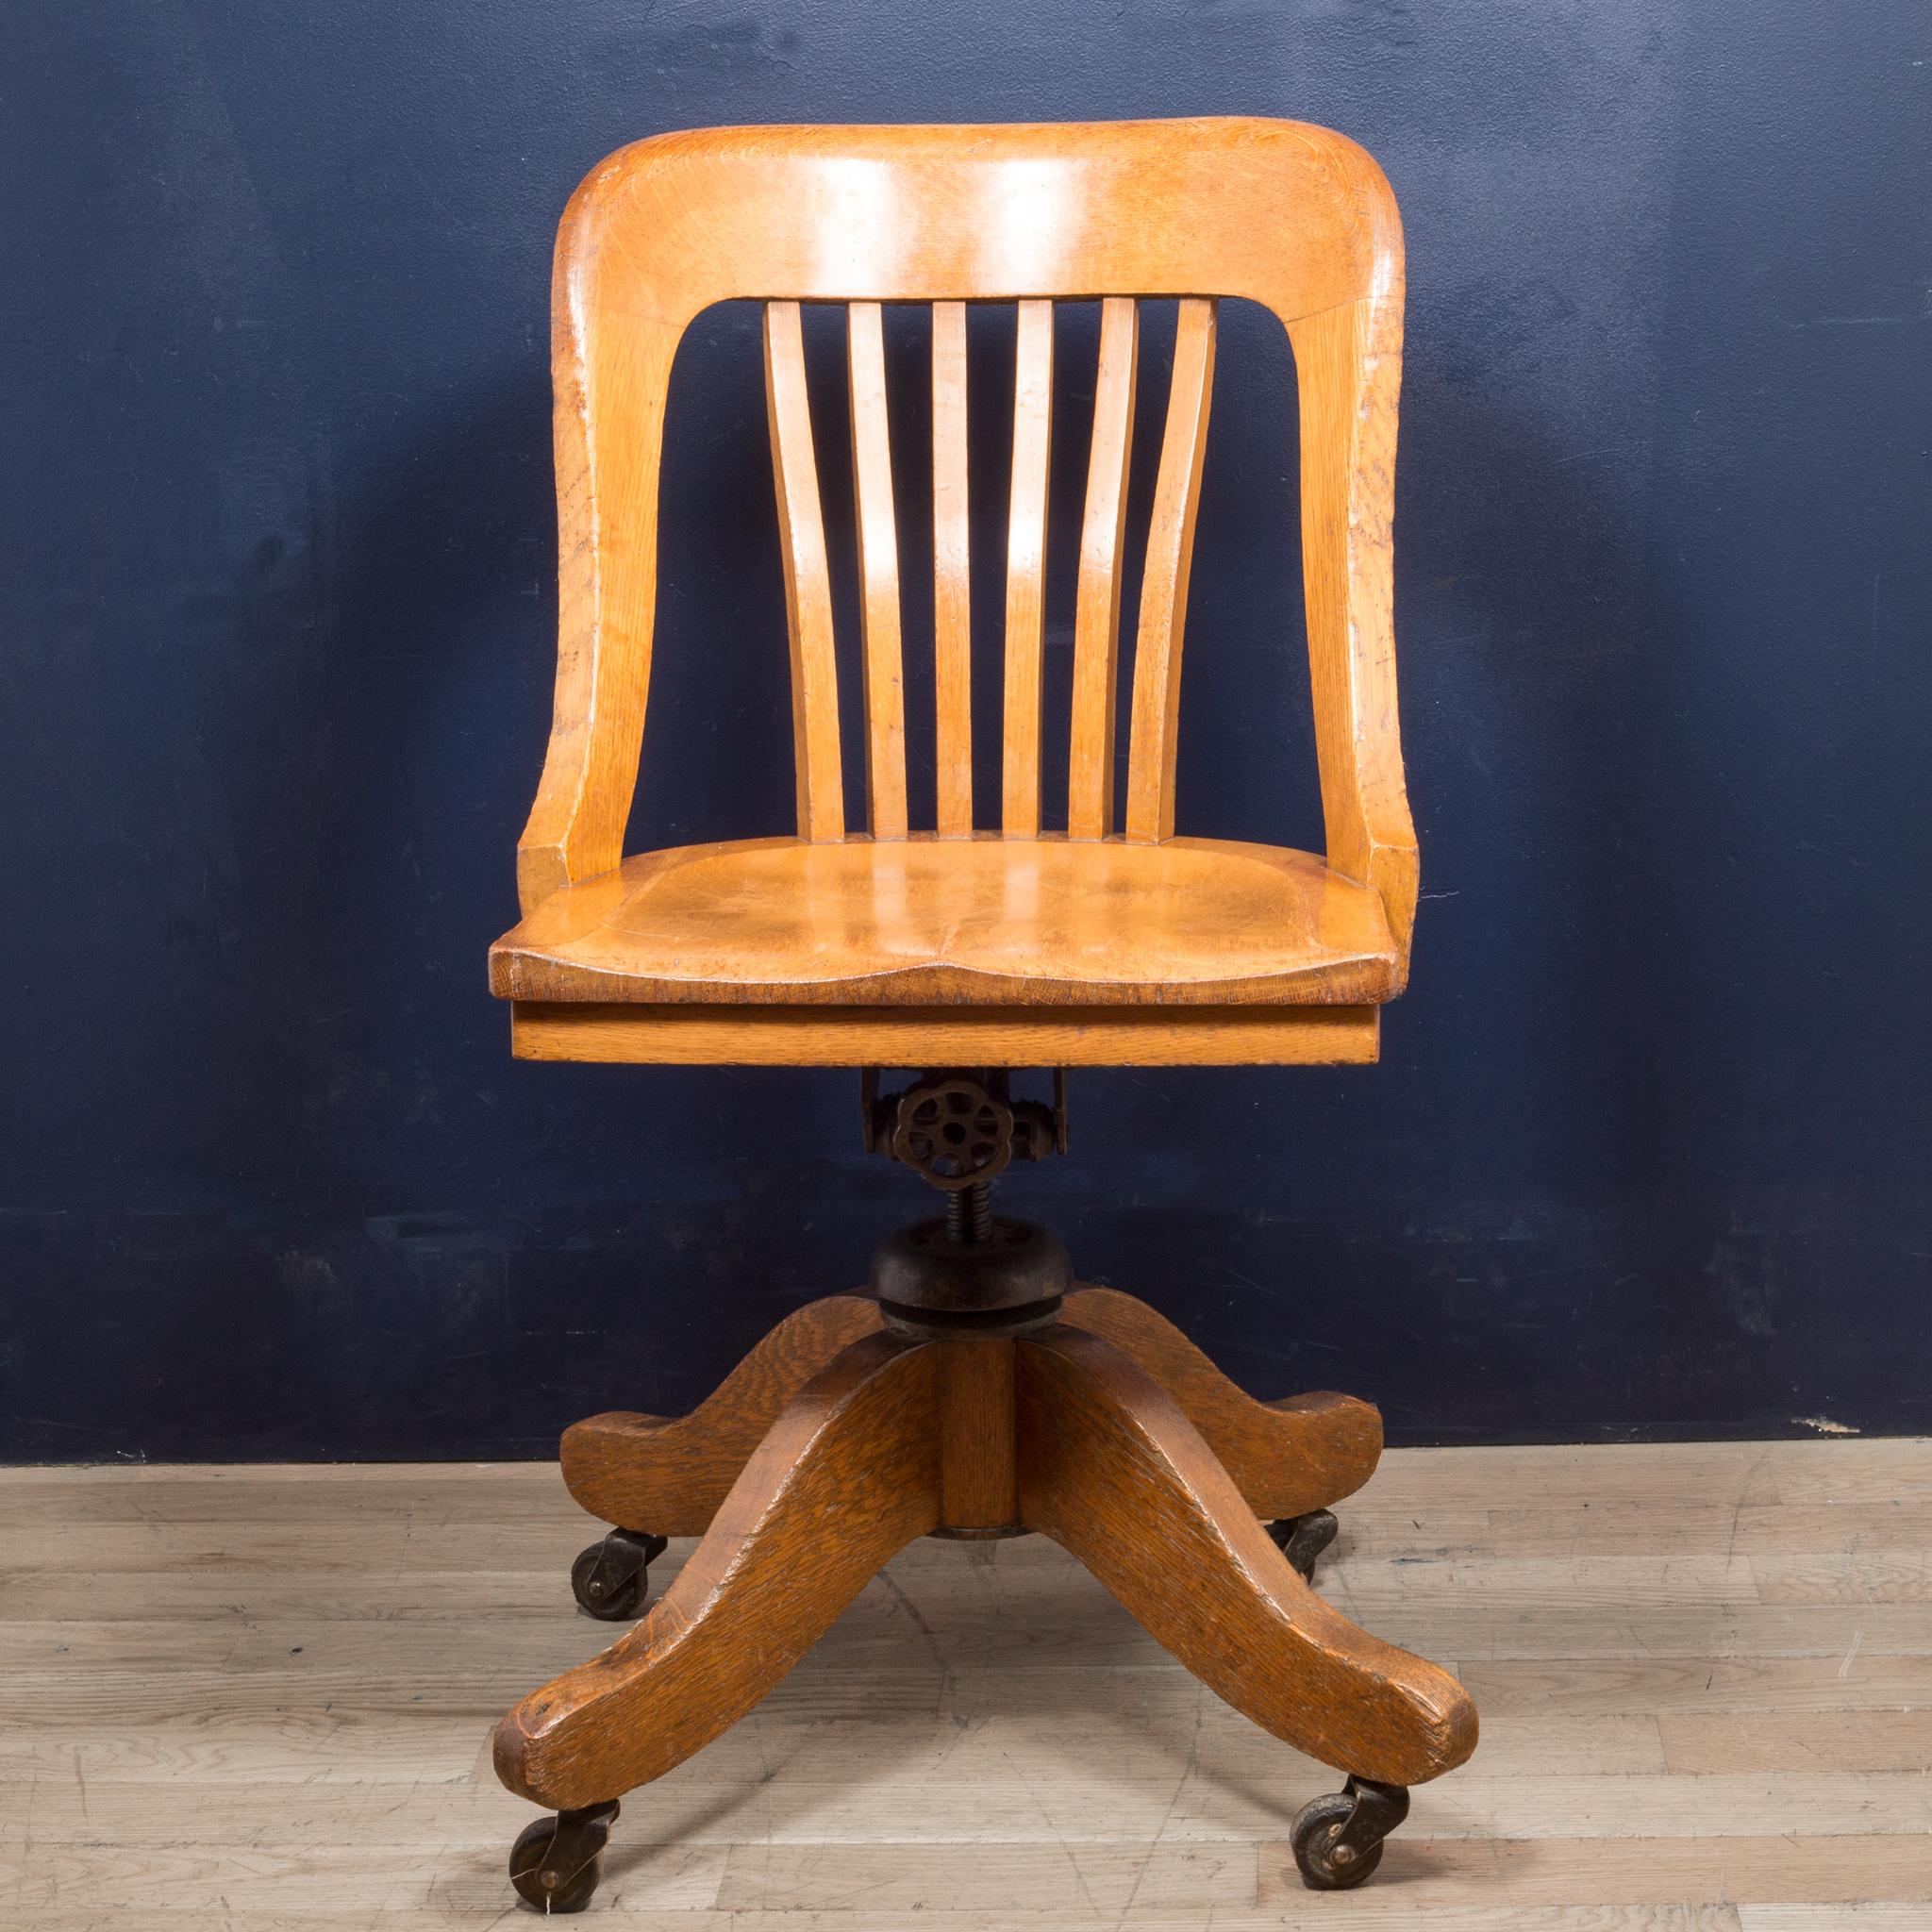 About

This is an original solid tiger oak desk chair with cast iron mechanism, casters and original maker's metal tag. This chair swivels, tilts back and the height is adjustable. This chair has retained its original finish and has minor